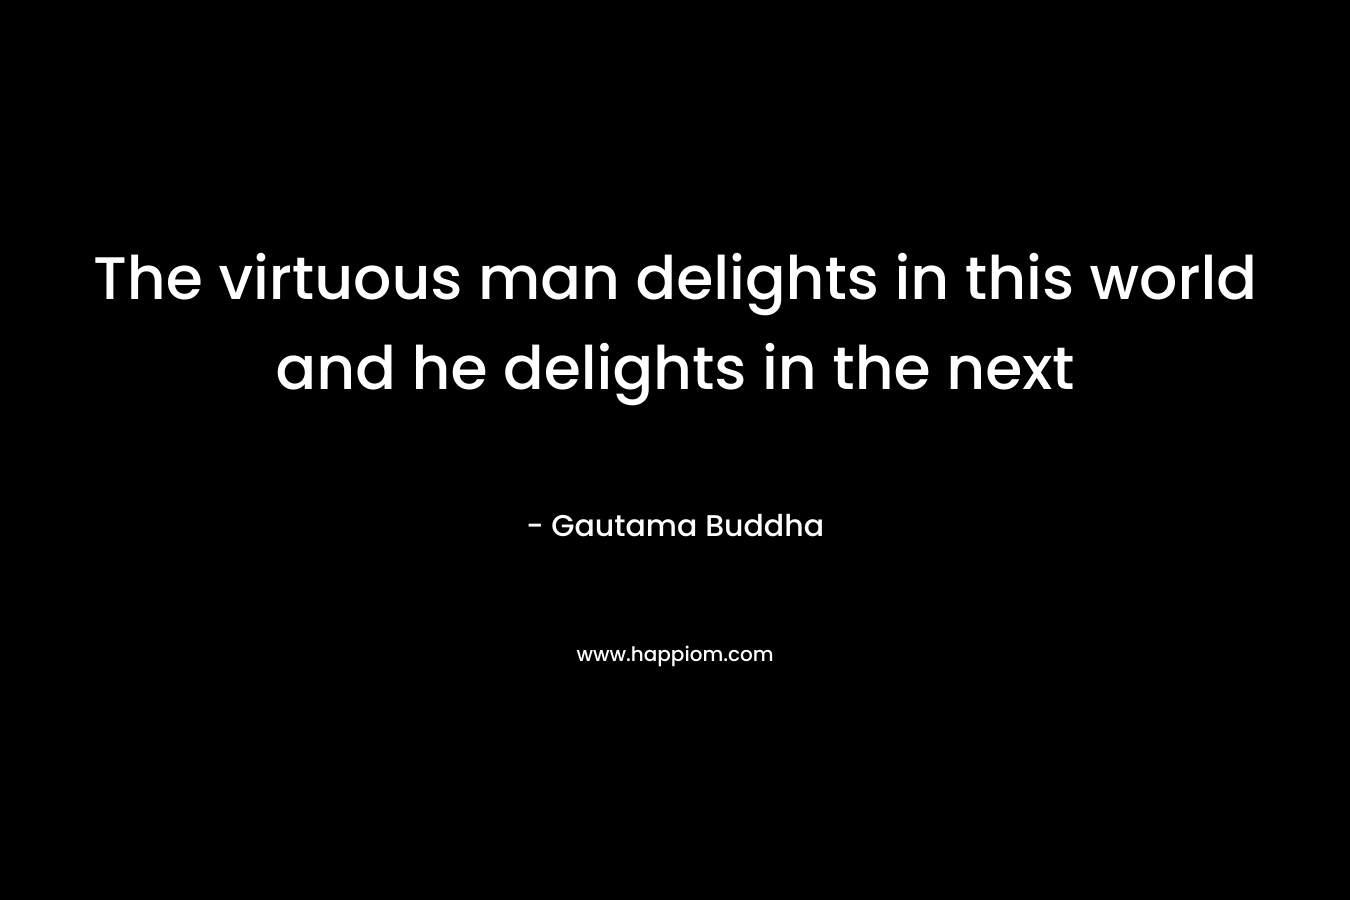 The virtuous man delights in this world and he delights in the next – Gautama Buddha